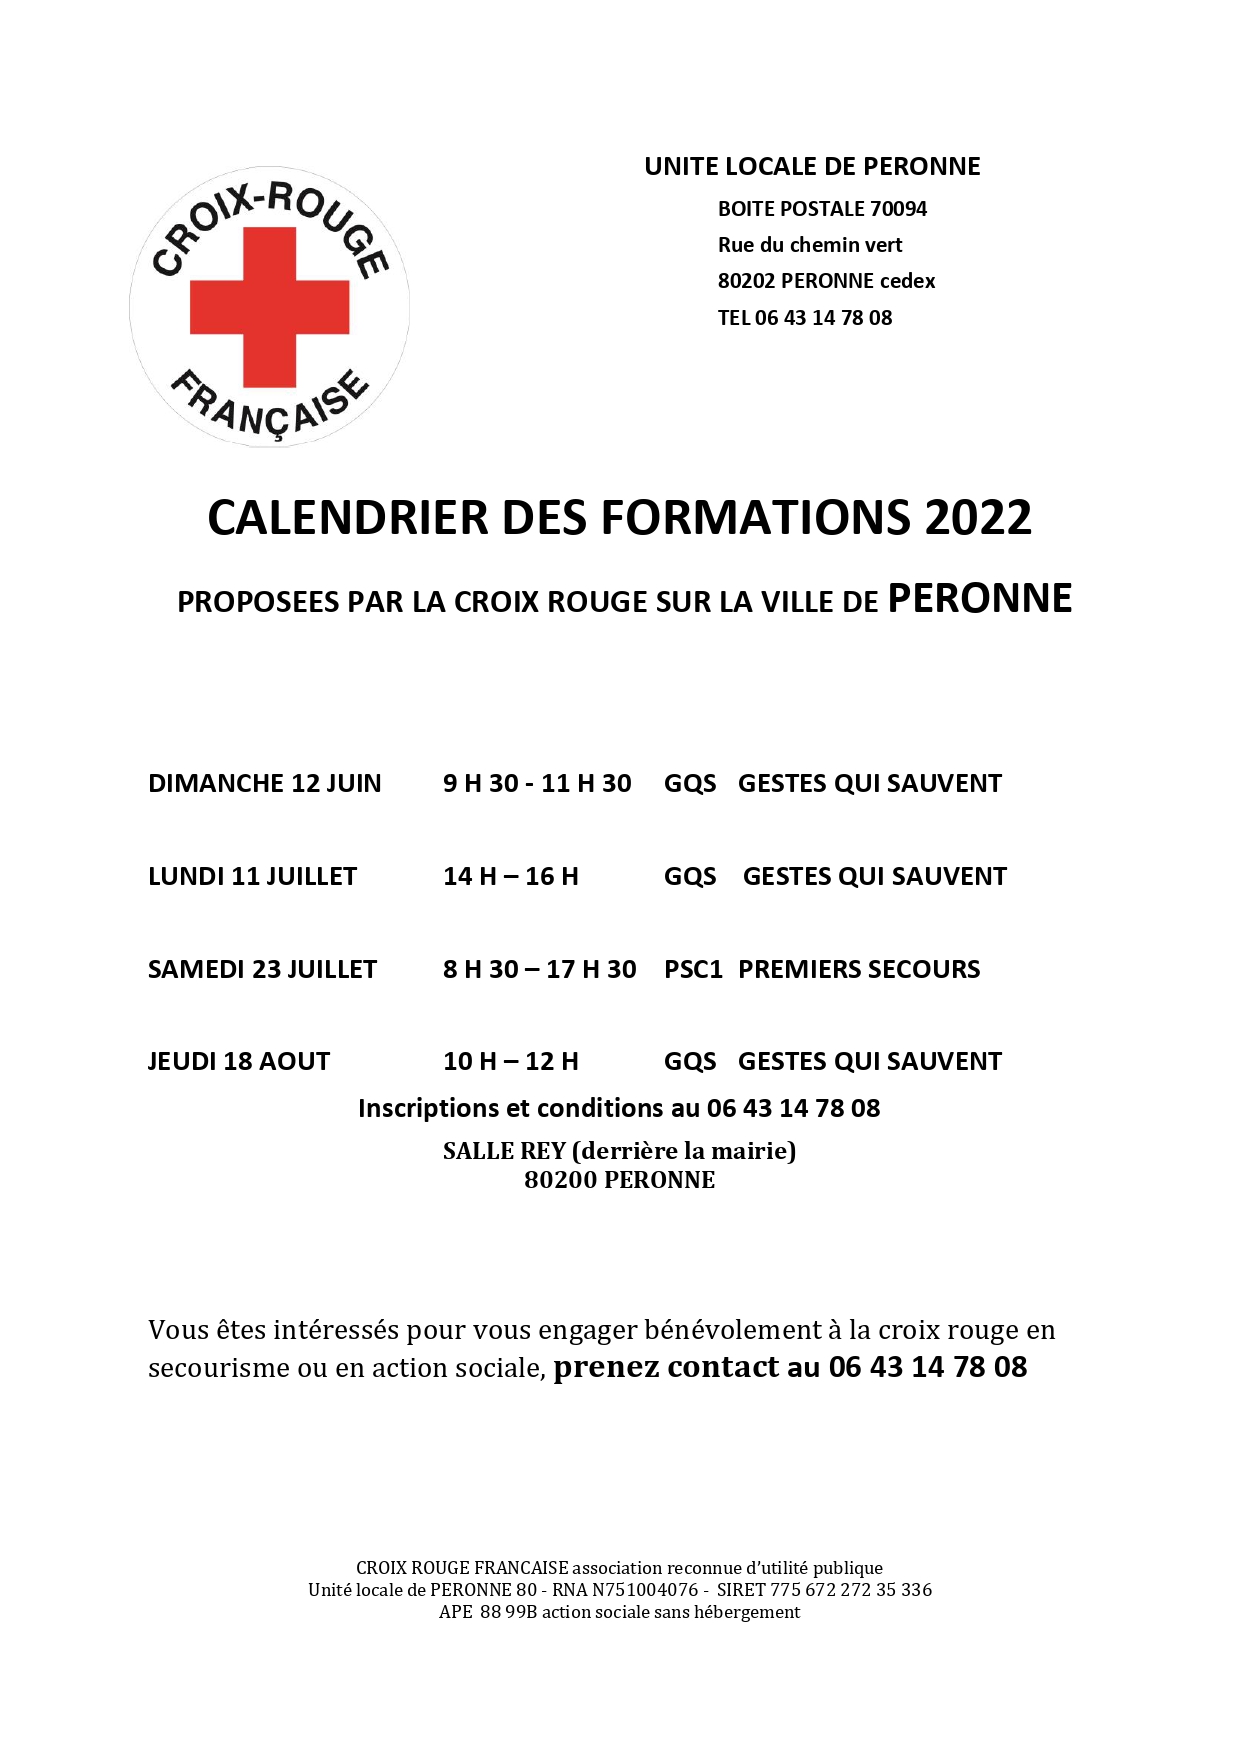 Calendrier formations croix rouge 2022.jpg